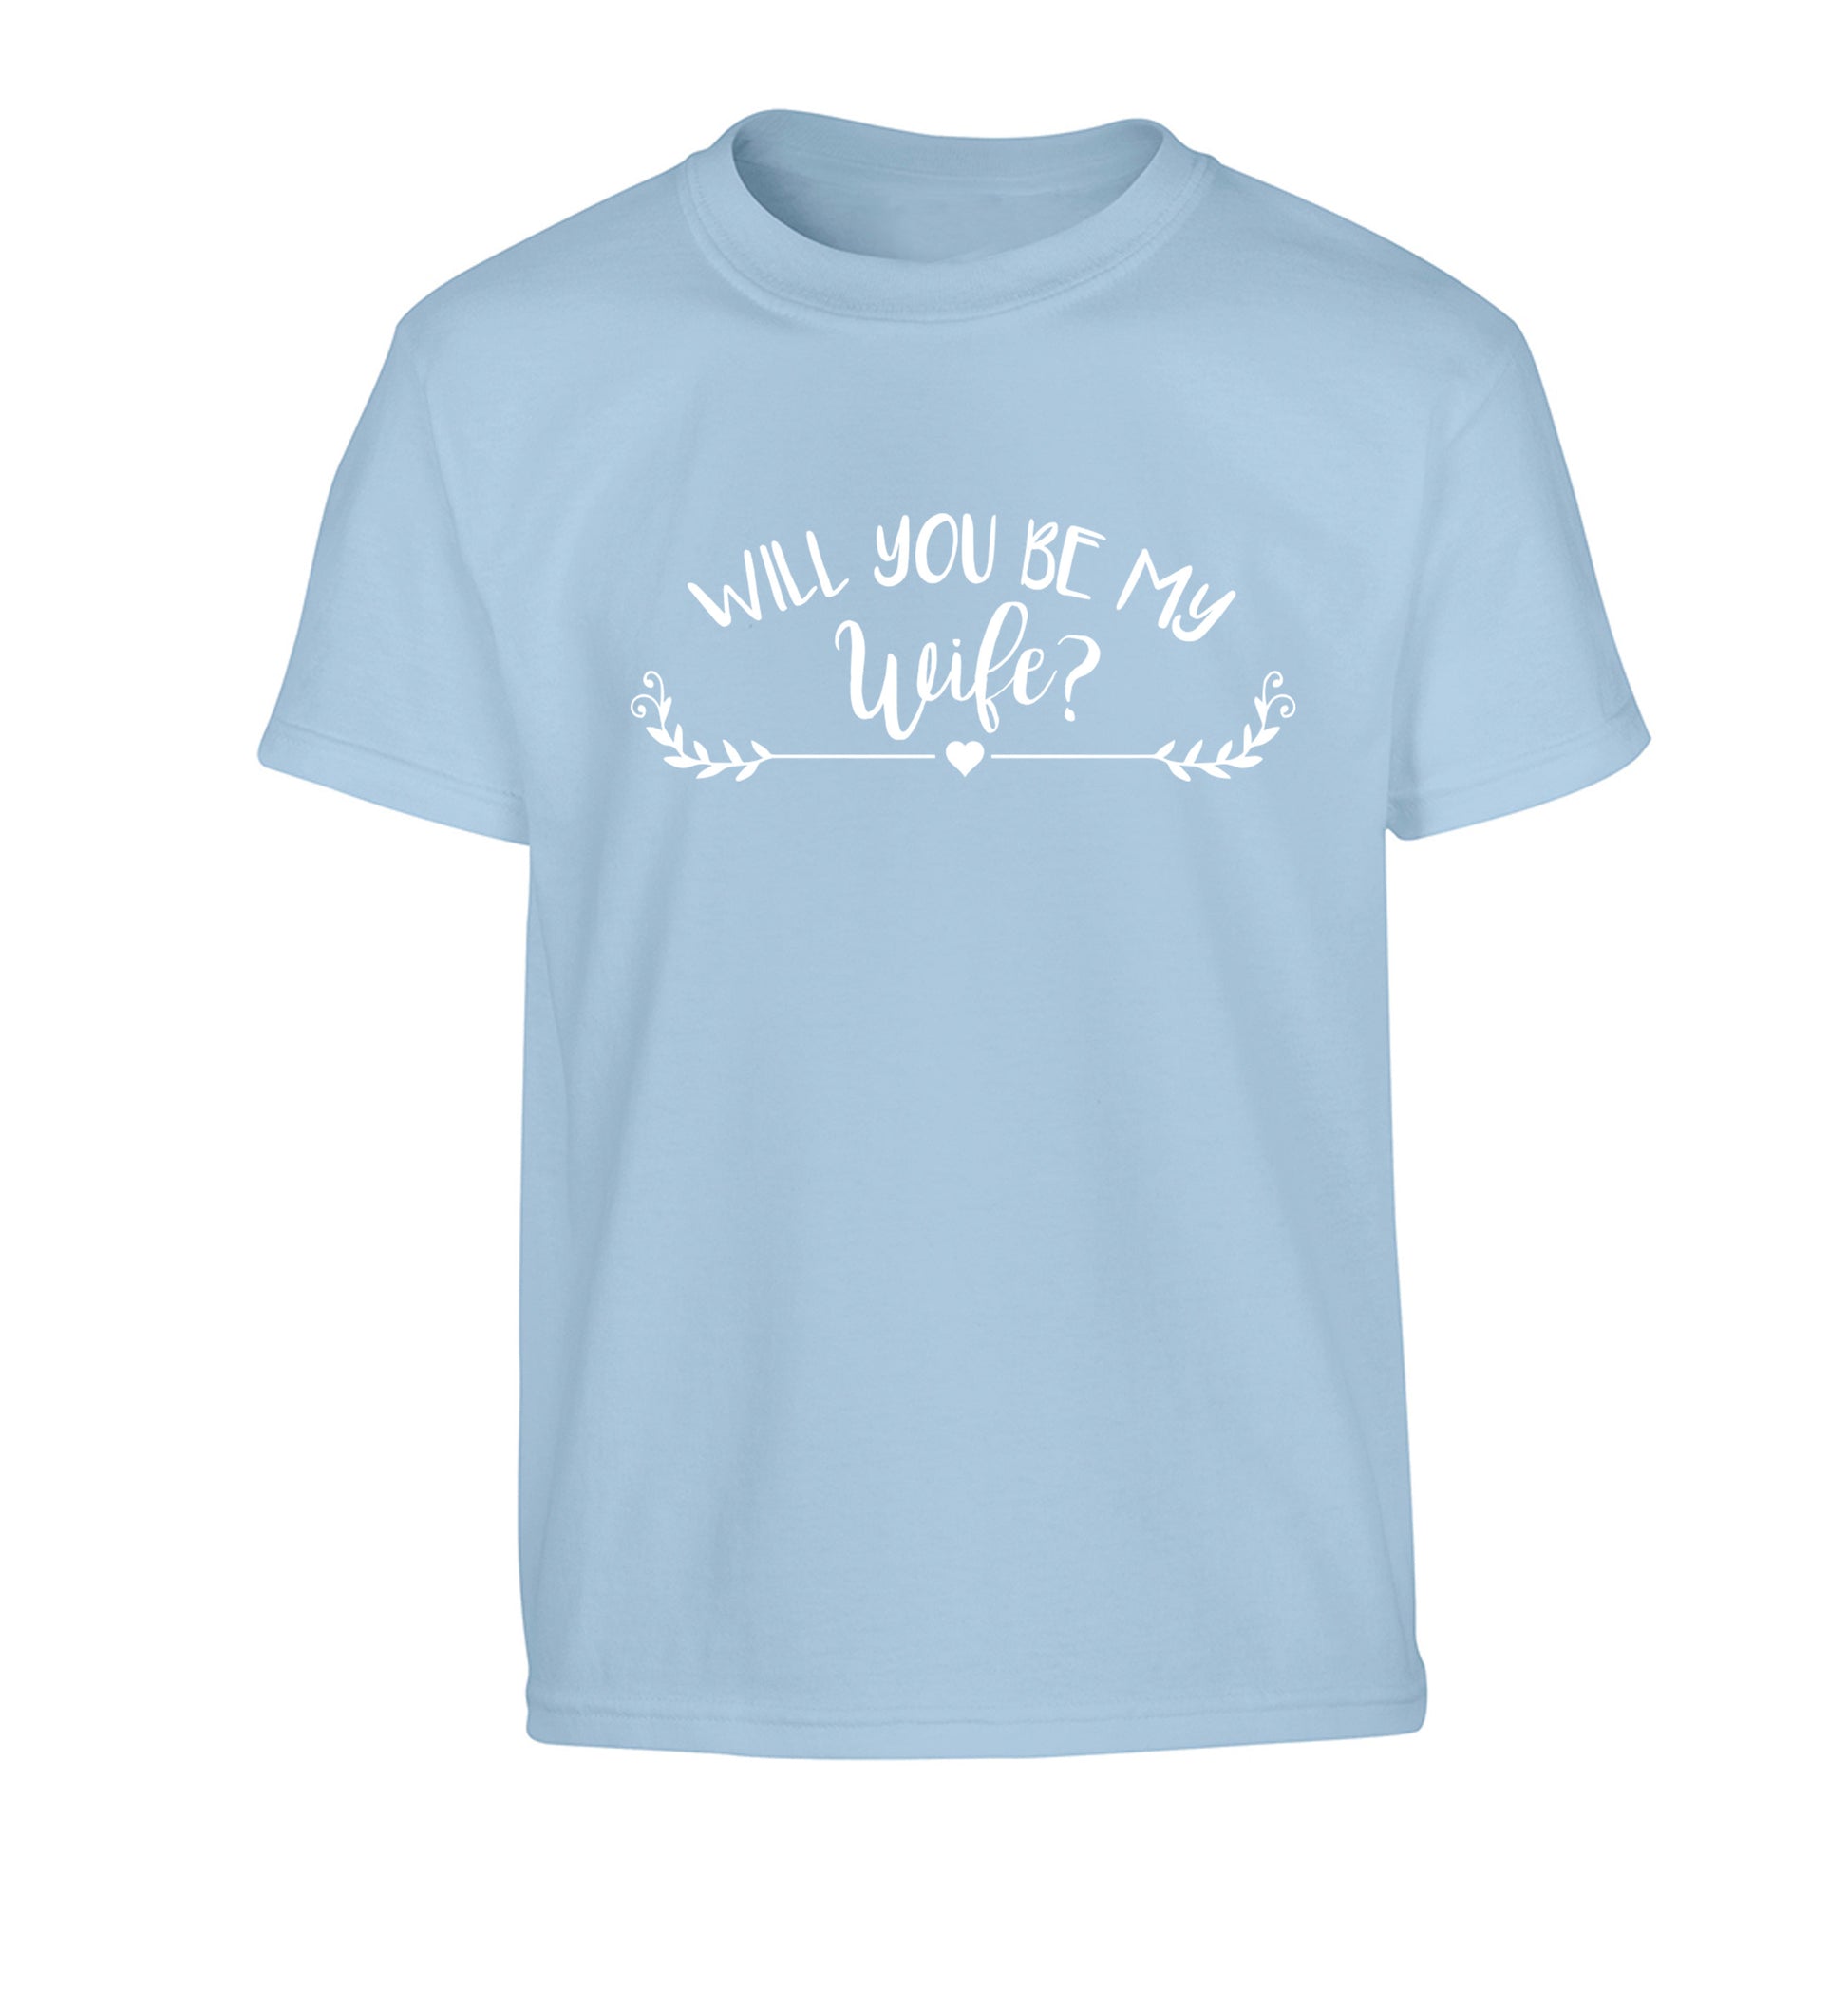 Will you be my wife? Children's light blue Tshirt 12-14 Years